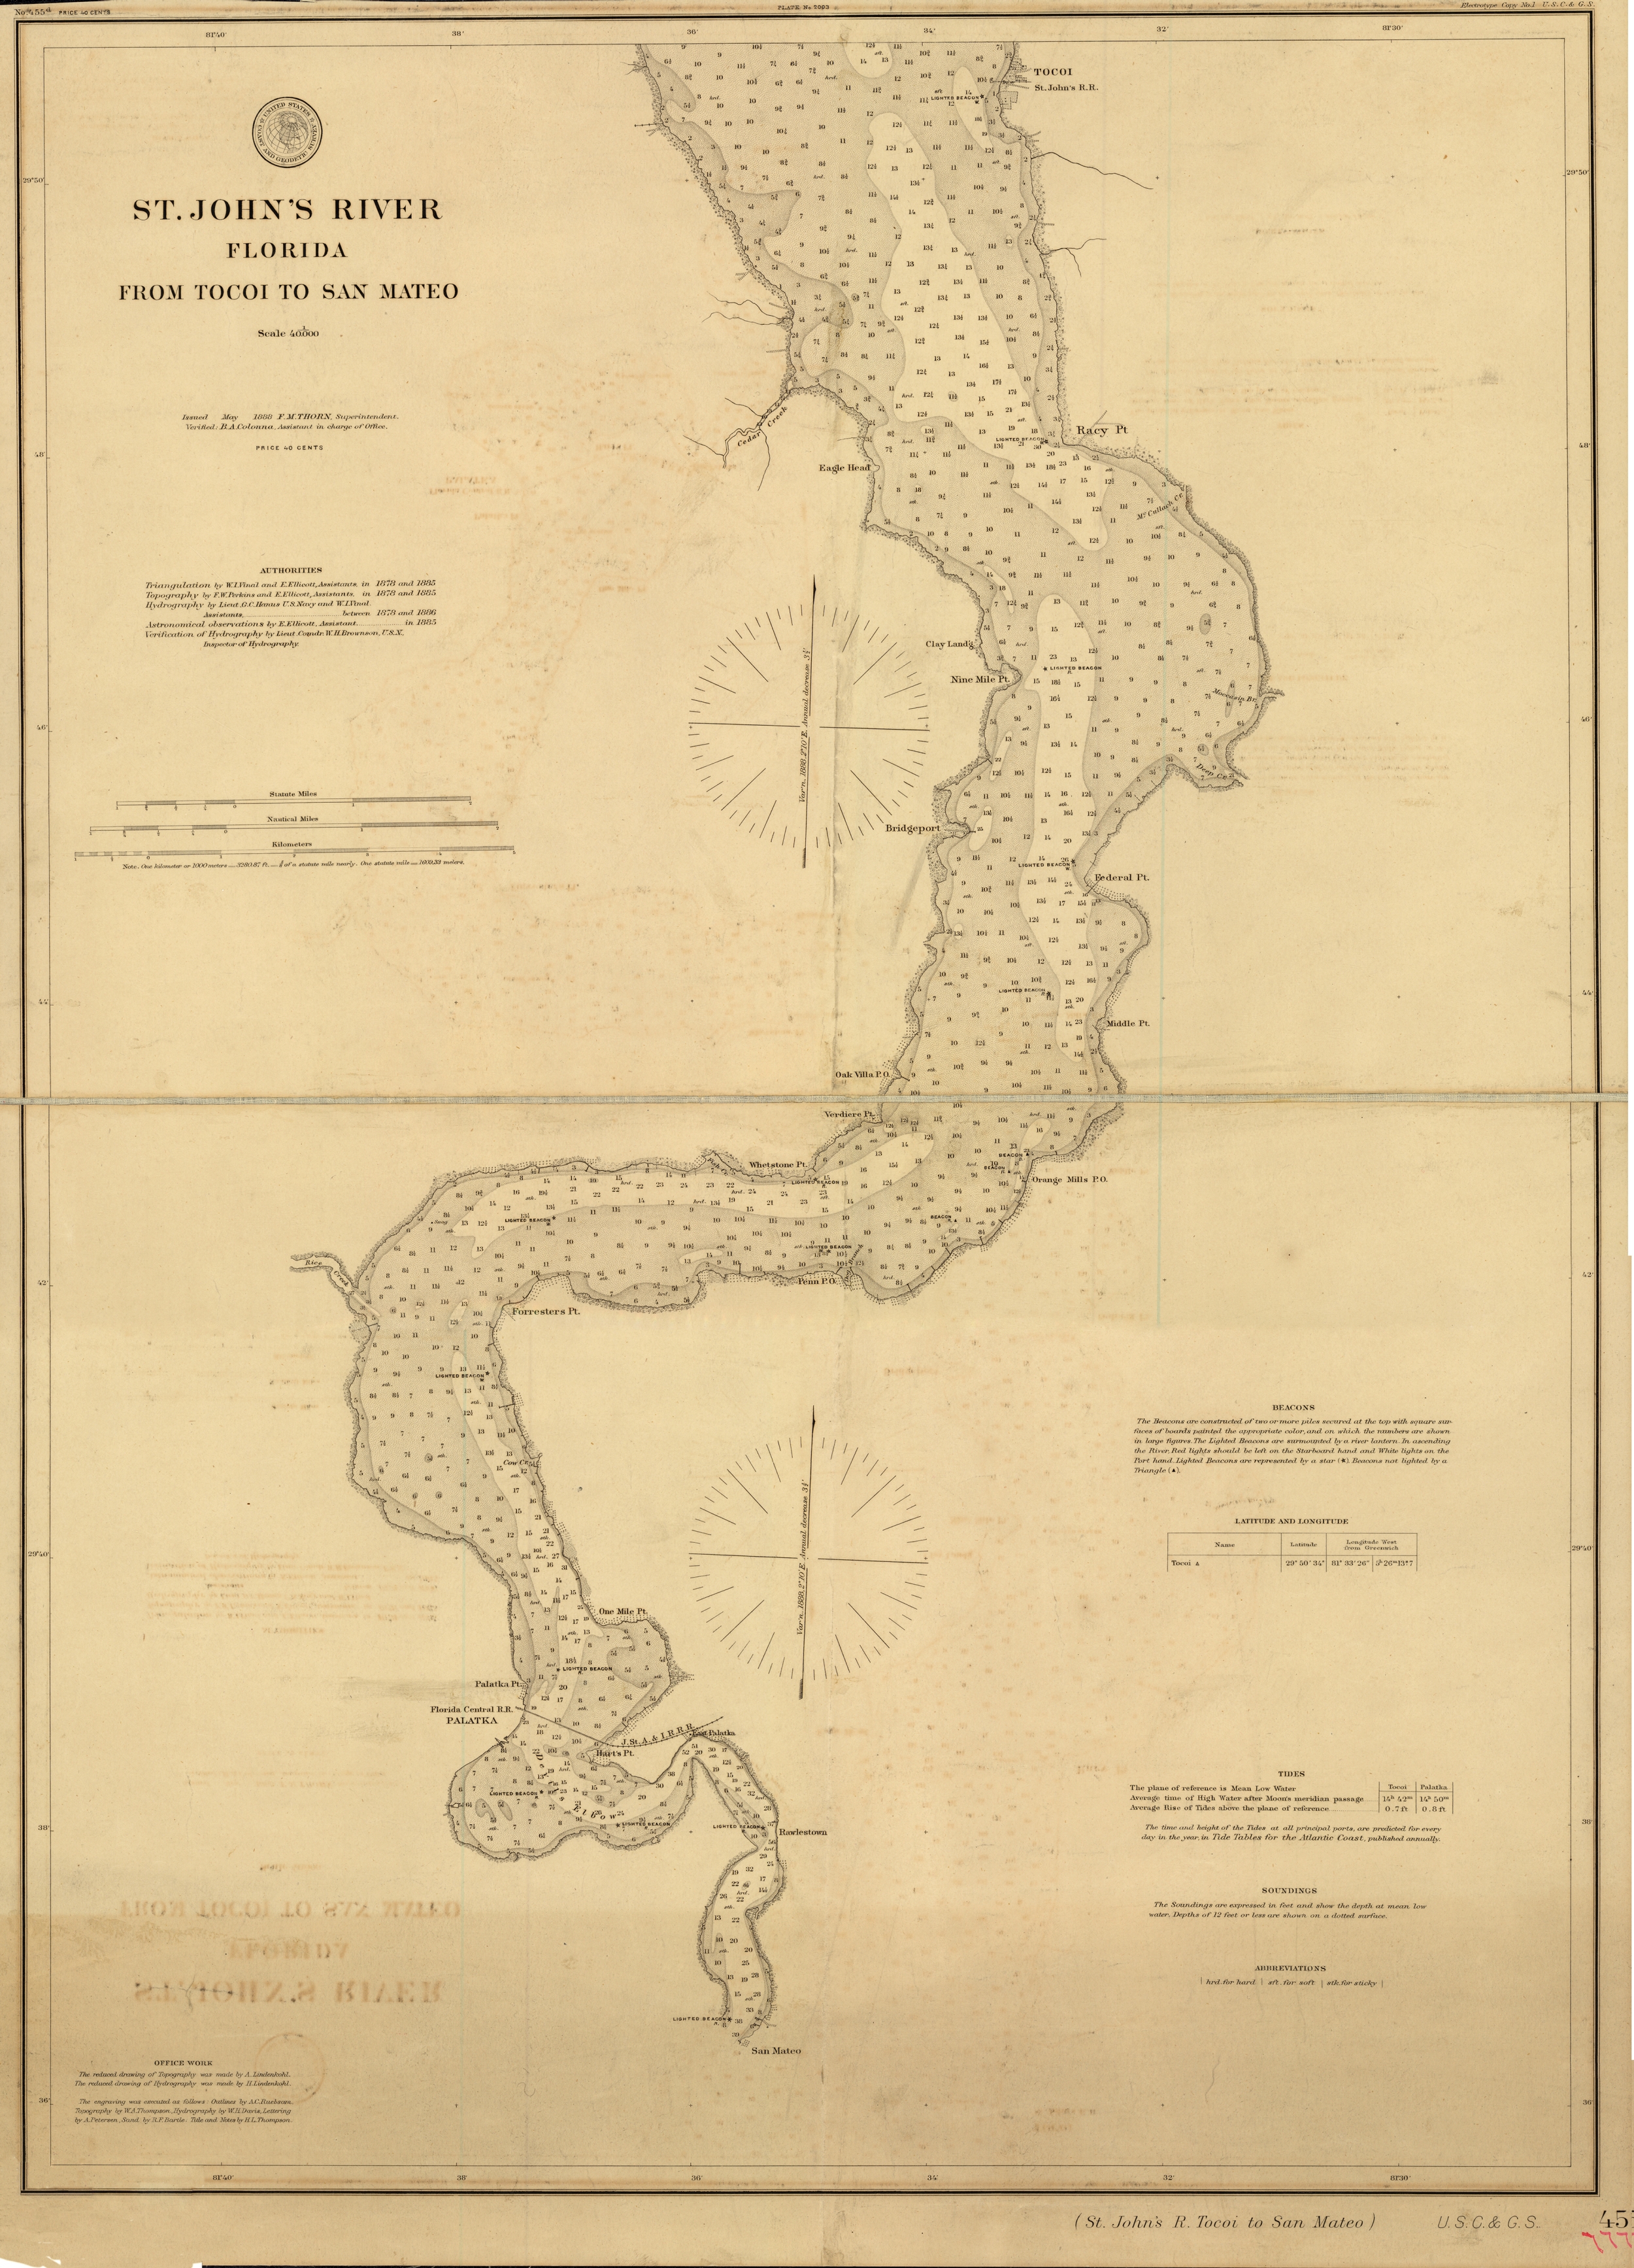 Survey of the mouth of the Apalachicola River, 1857